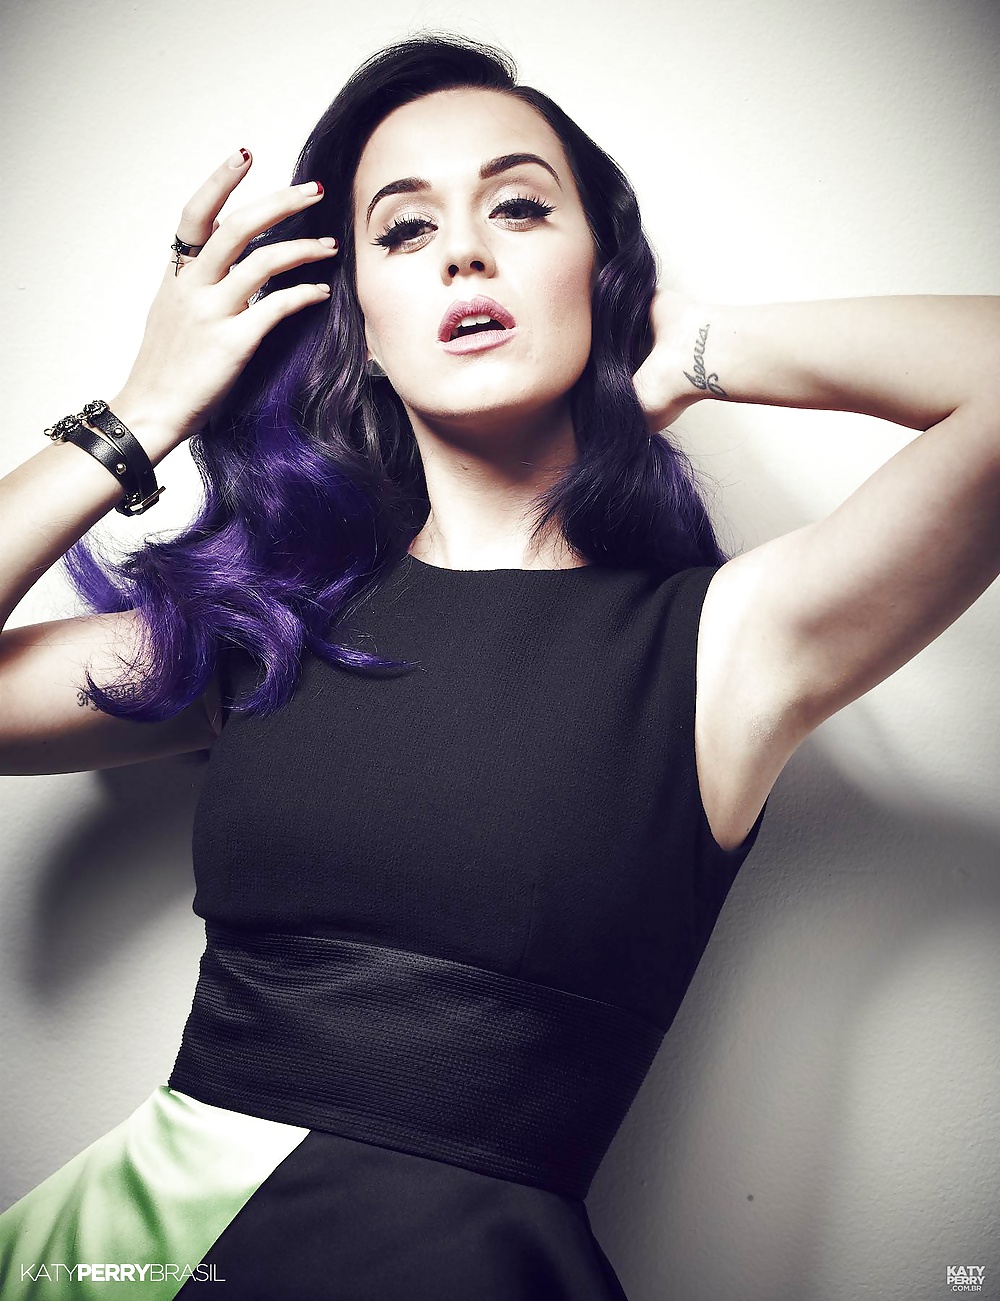 Katy Perry Aisselle Chaumes #30976748